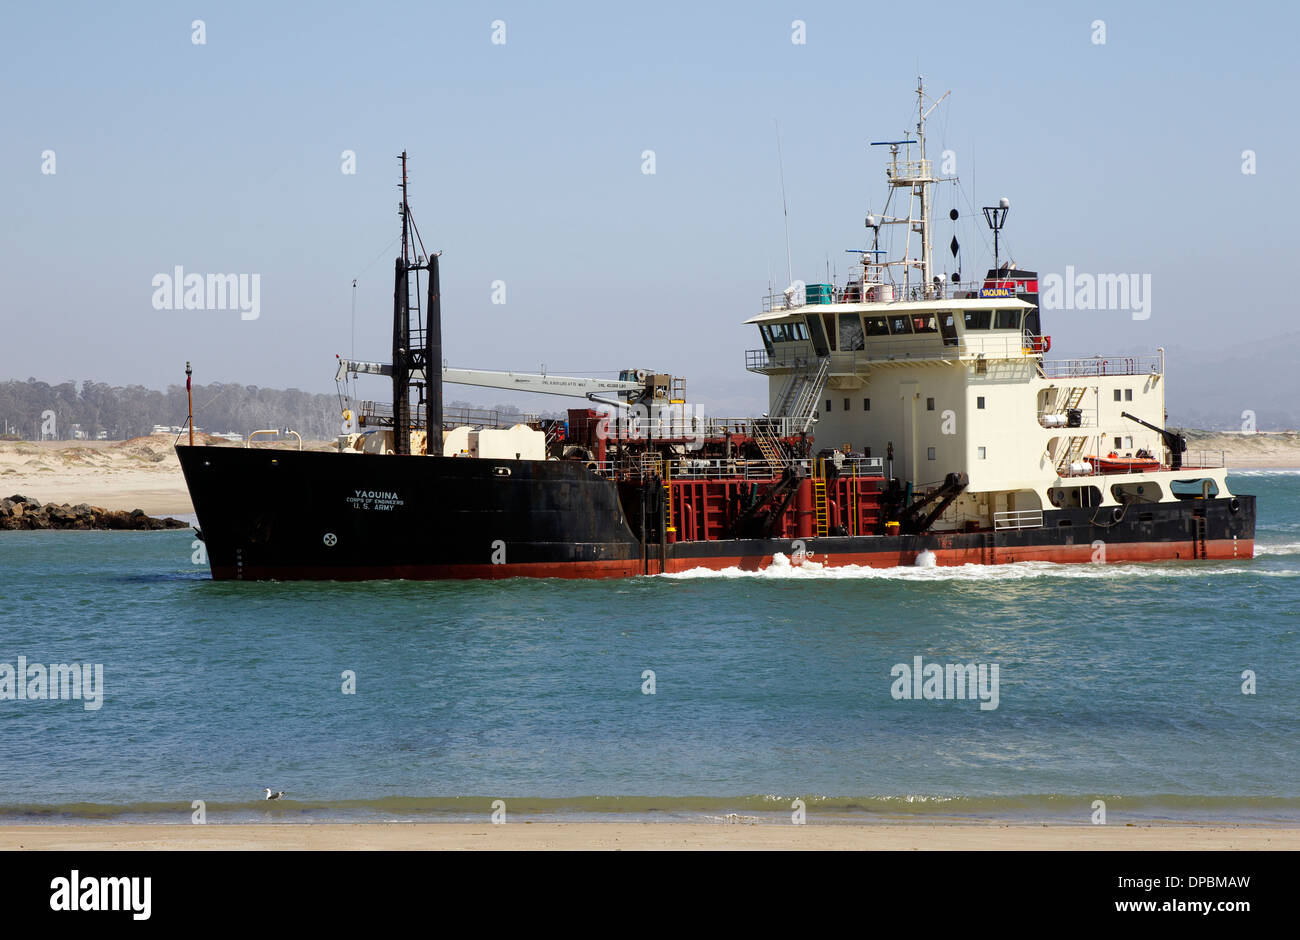 Yaquina Army Corps of Engineers Dredger Stock Photo